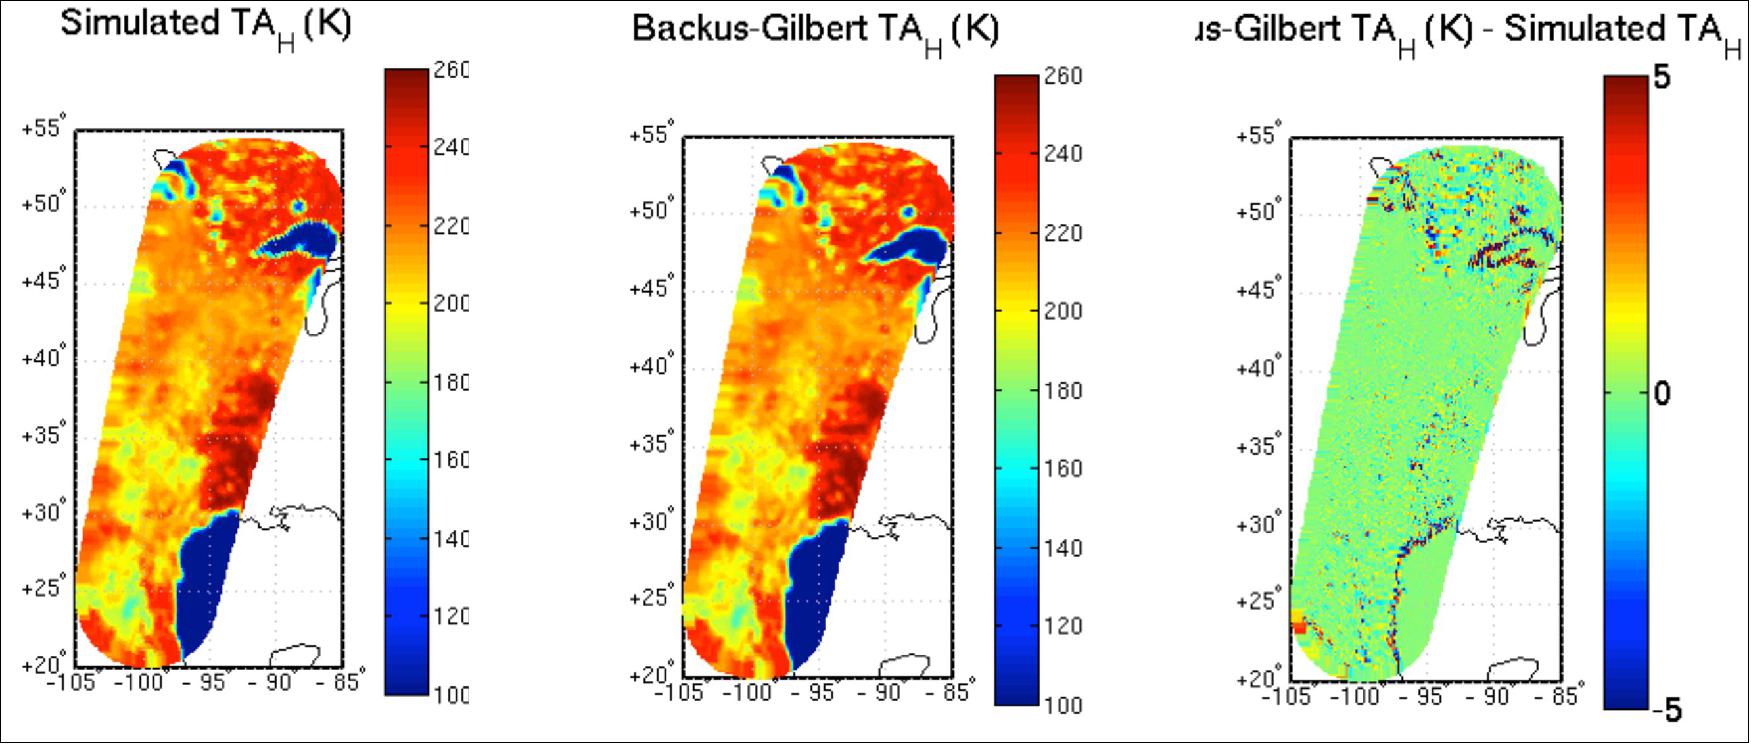 Figure 29: Illustration of the Backus-Gilbert interpolation algorithm applied to simulated SMAP radiometer data. Left panel simulated data; middle panel: BG output; right panel: difference between simulation and BG interpolation (image credit: NASA/JPL)